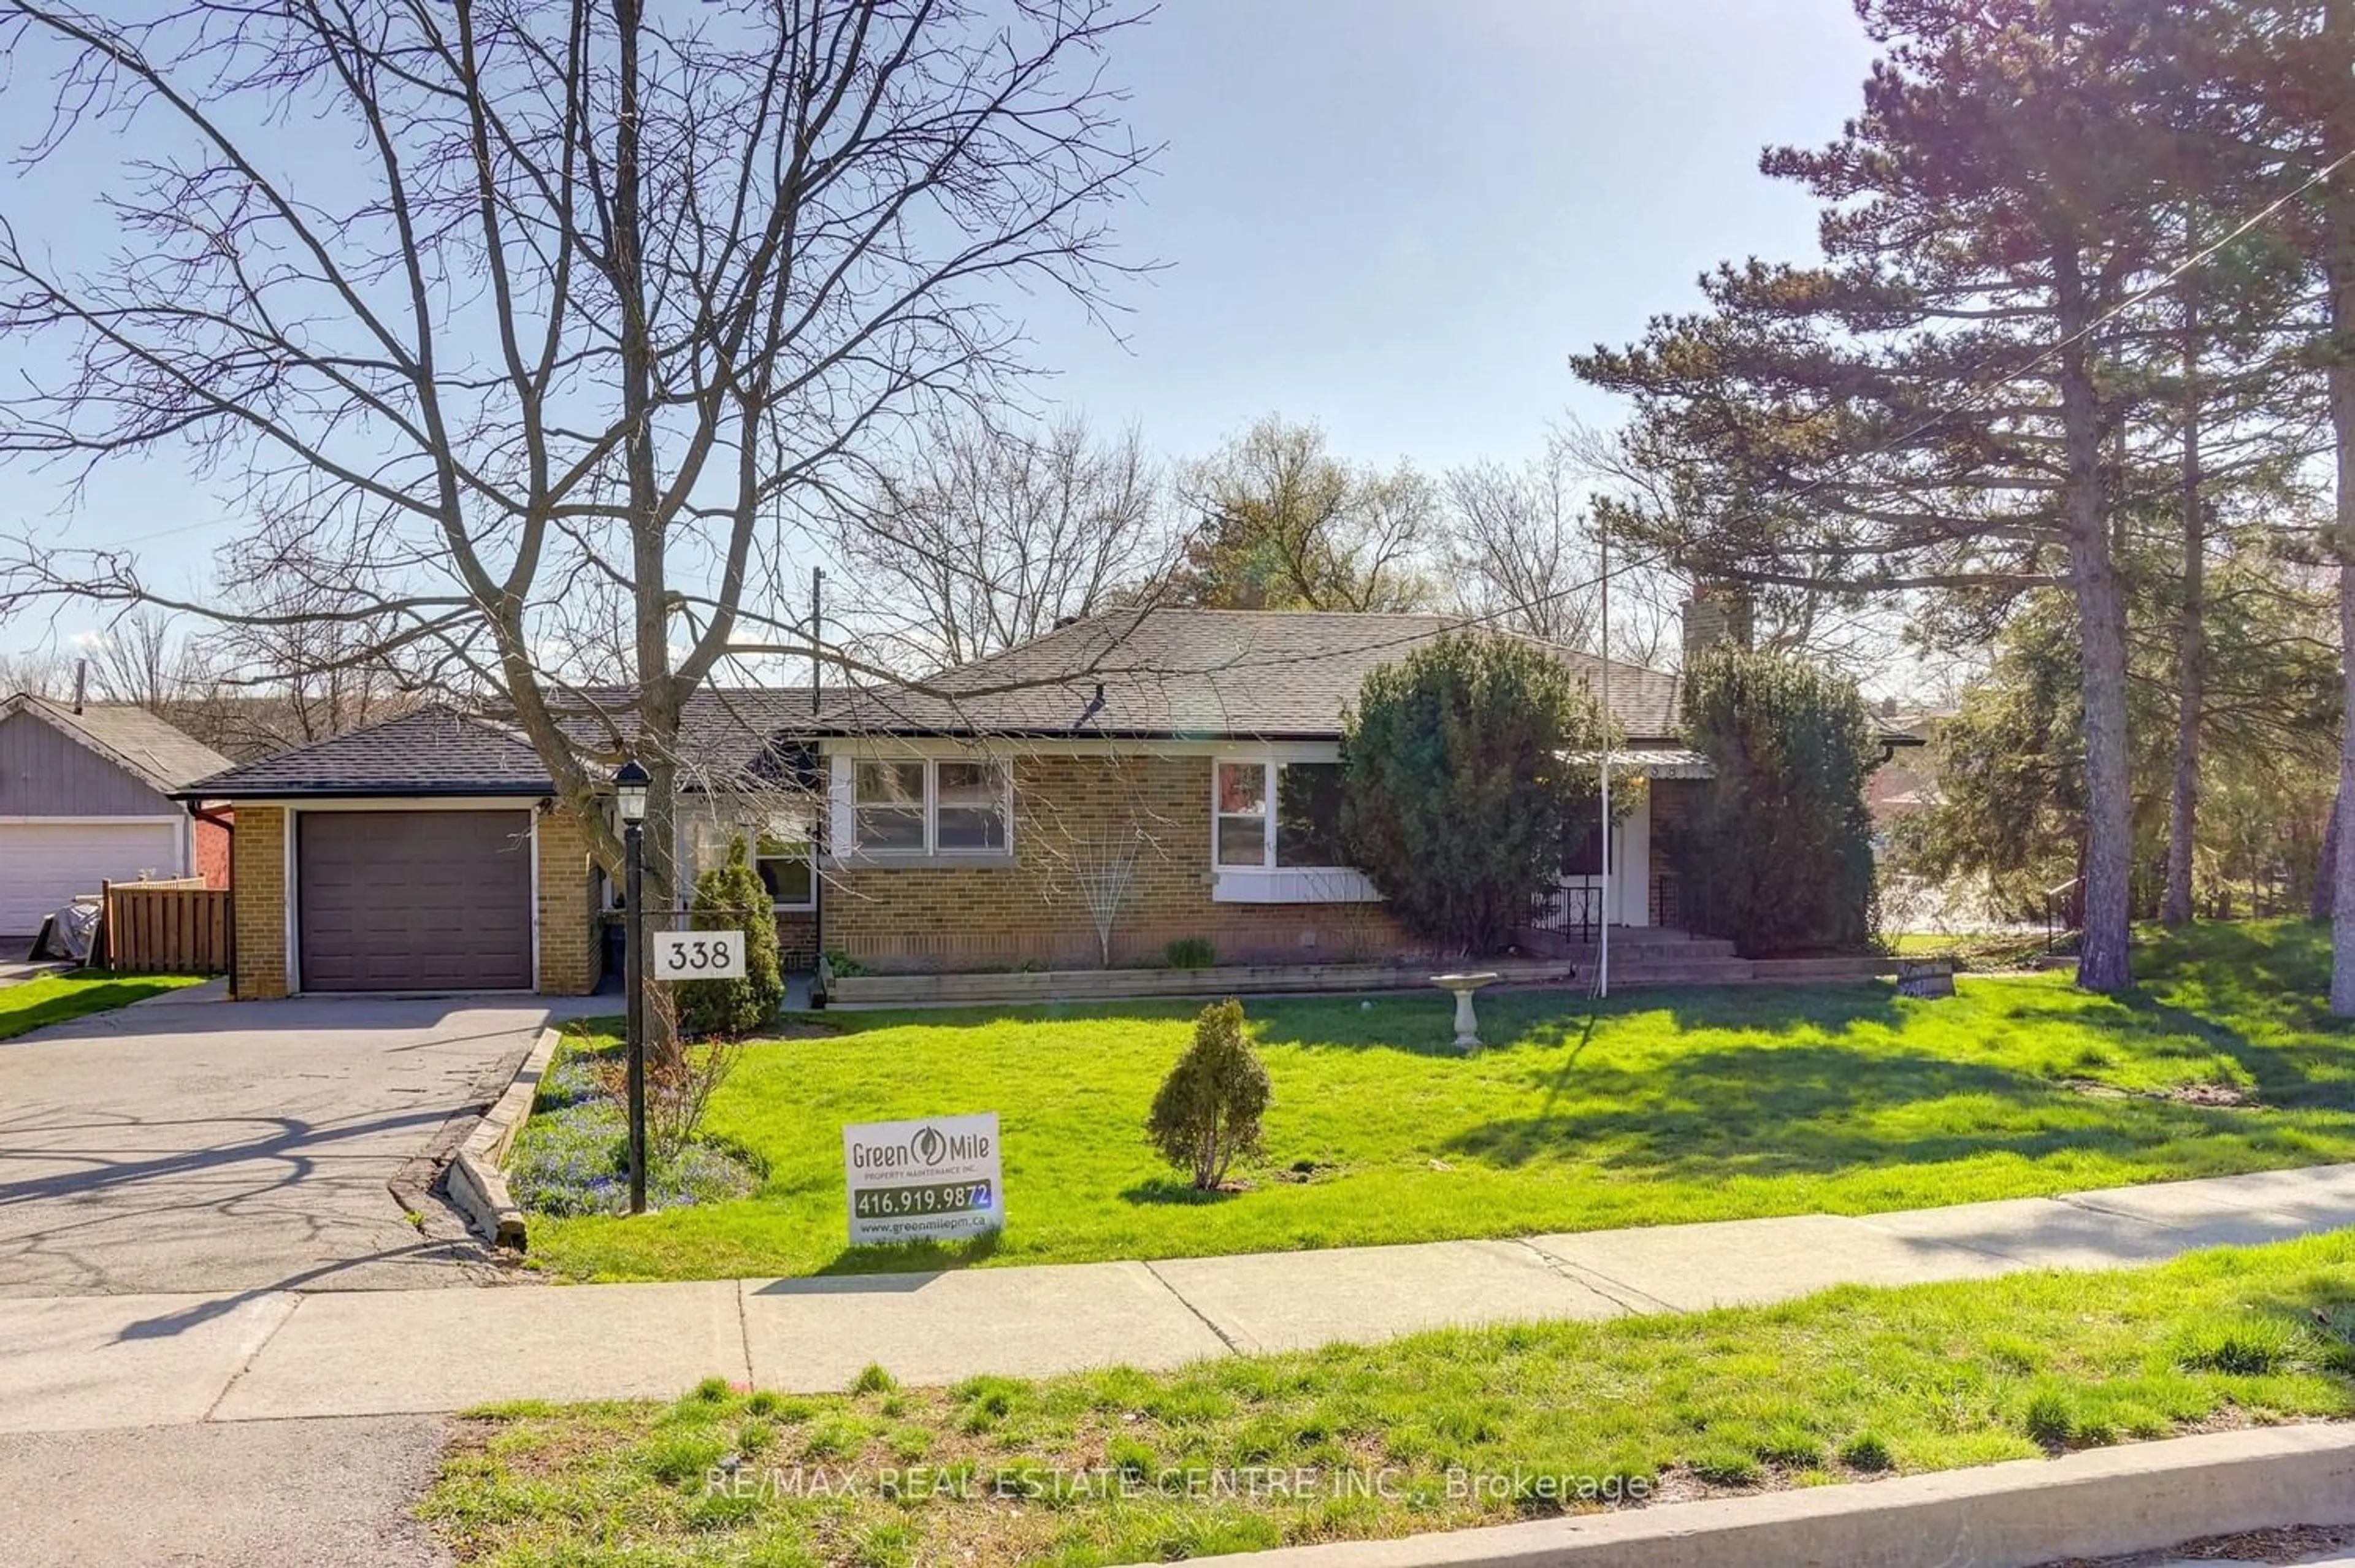 Frontside or backside of a home for 338 Queen St, Mississauga Ontario L5M 1M2